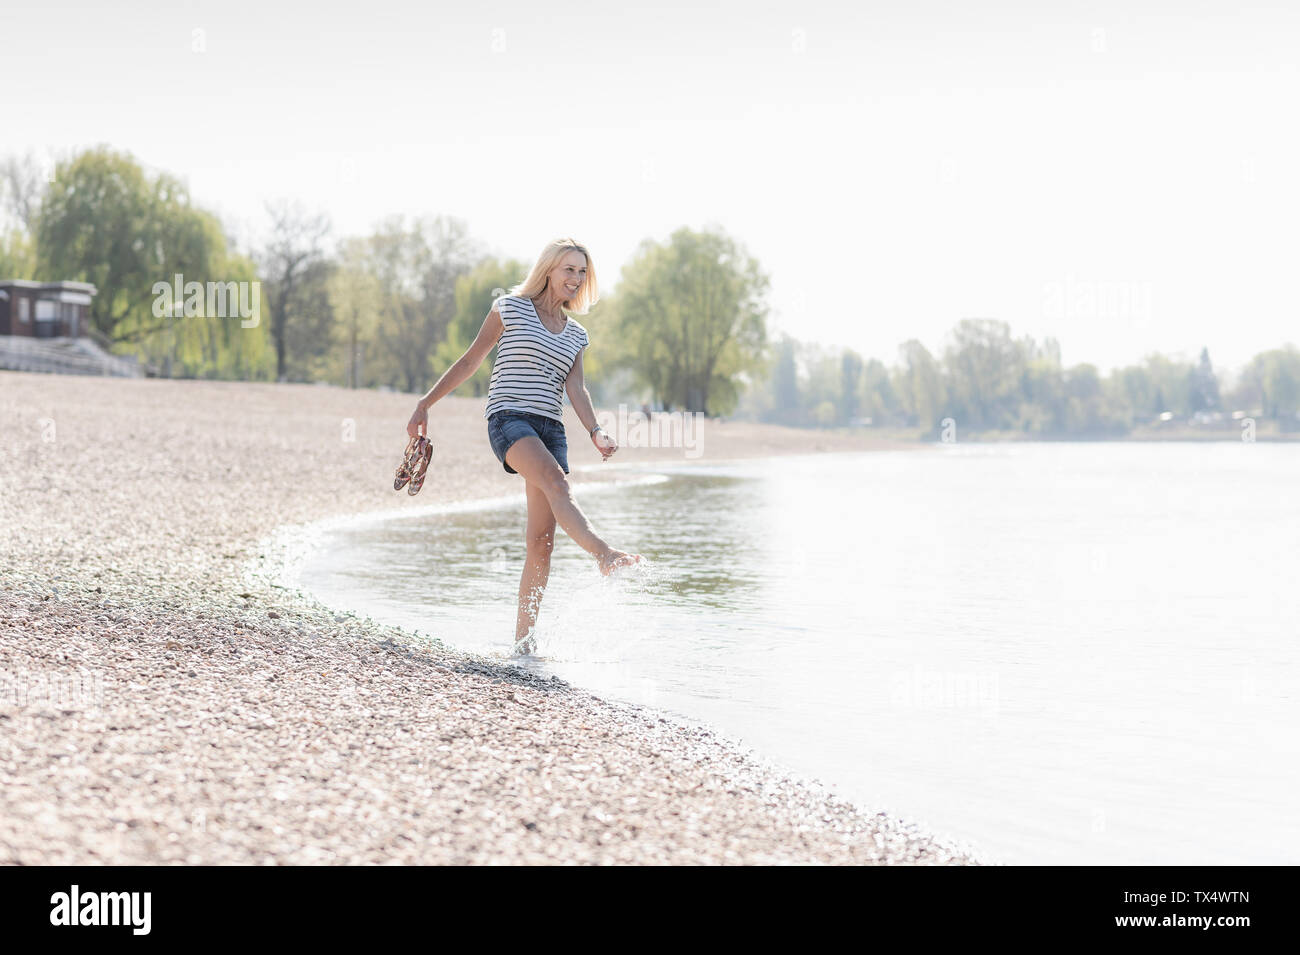 Carefree woman splashing in a river Banque D'Images